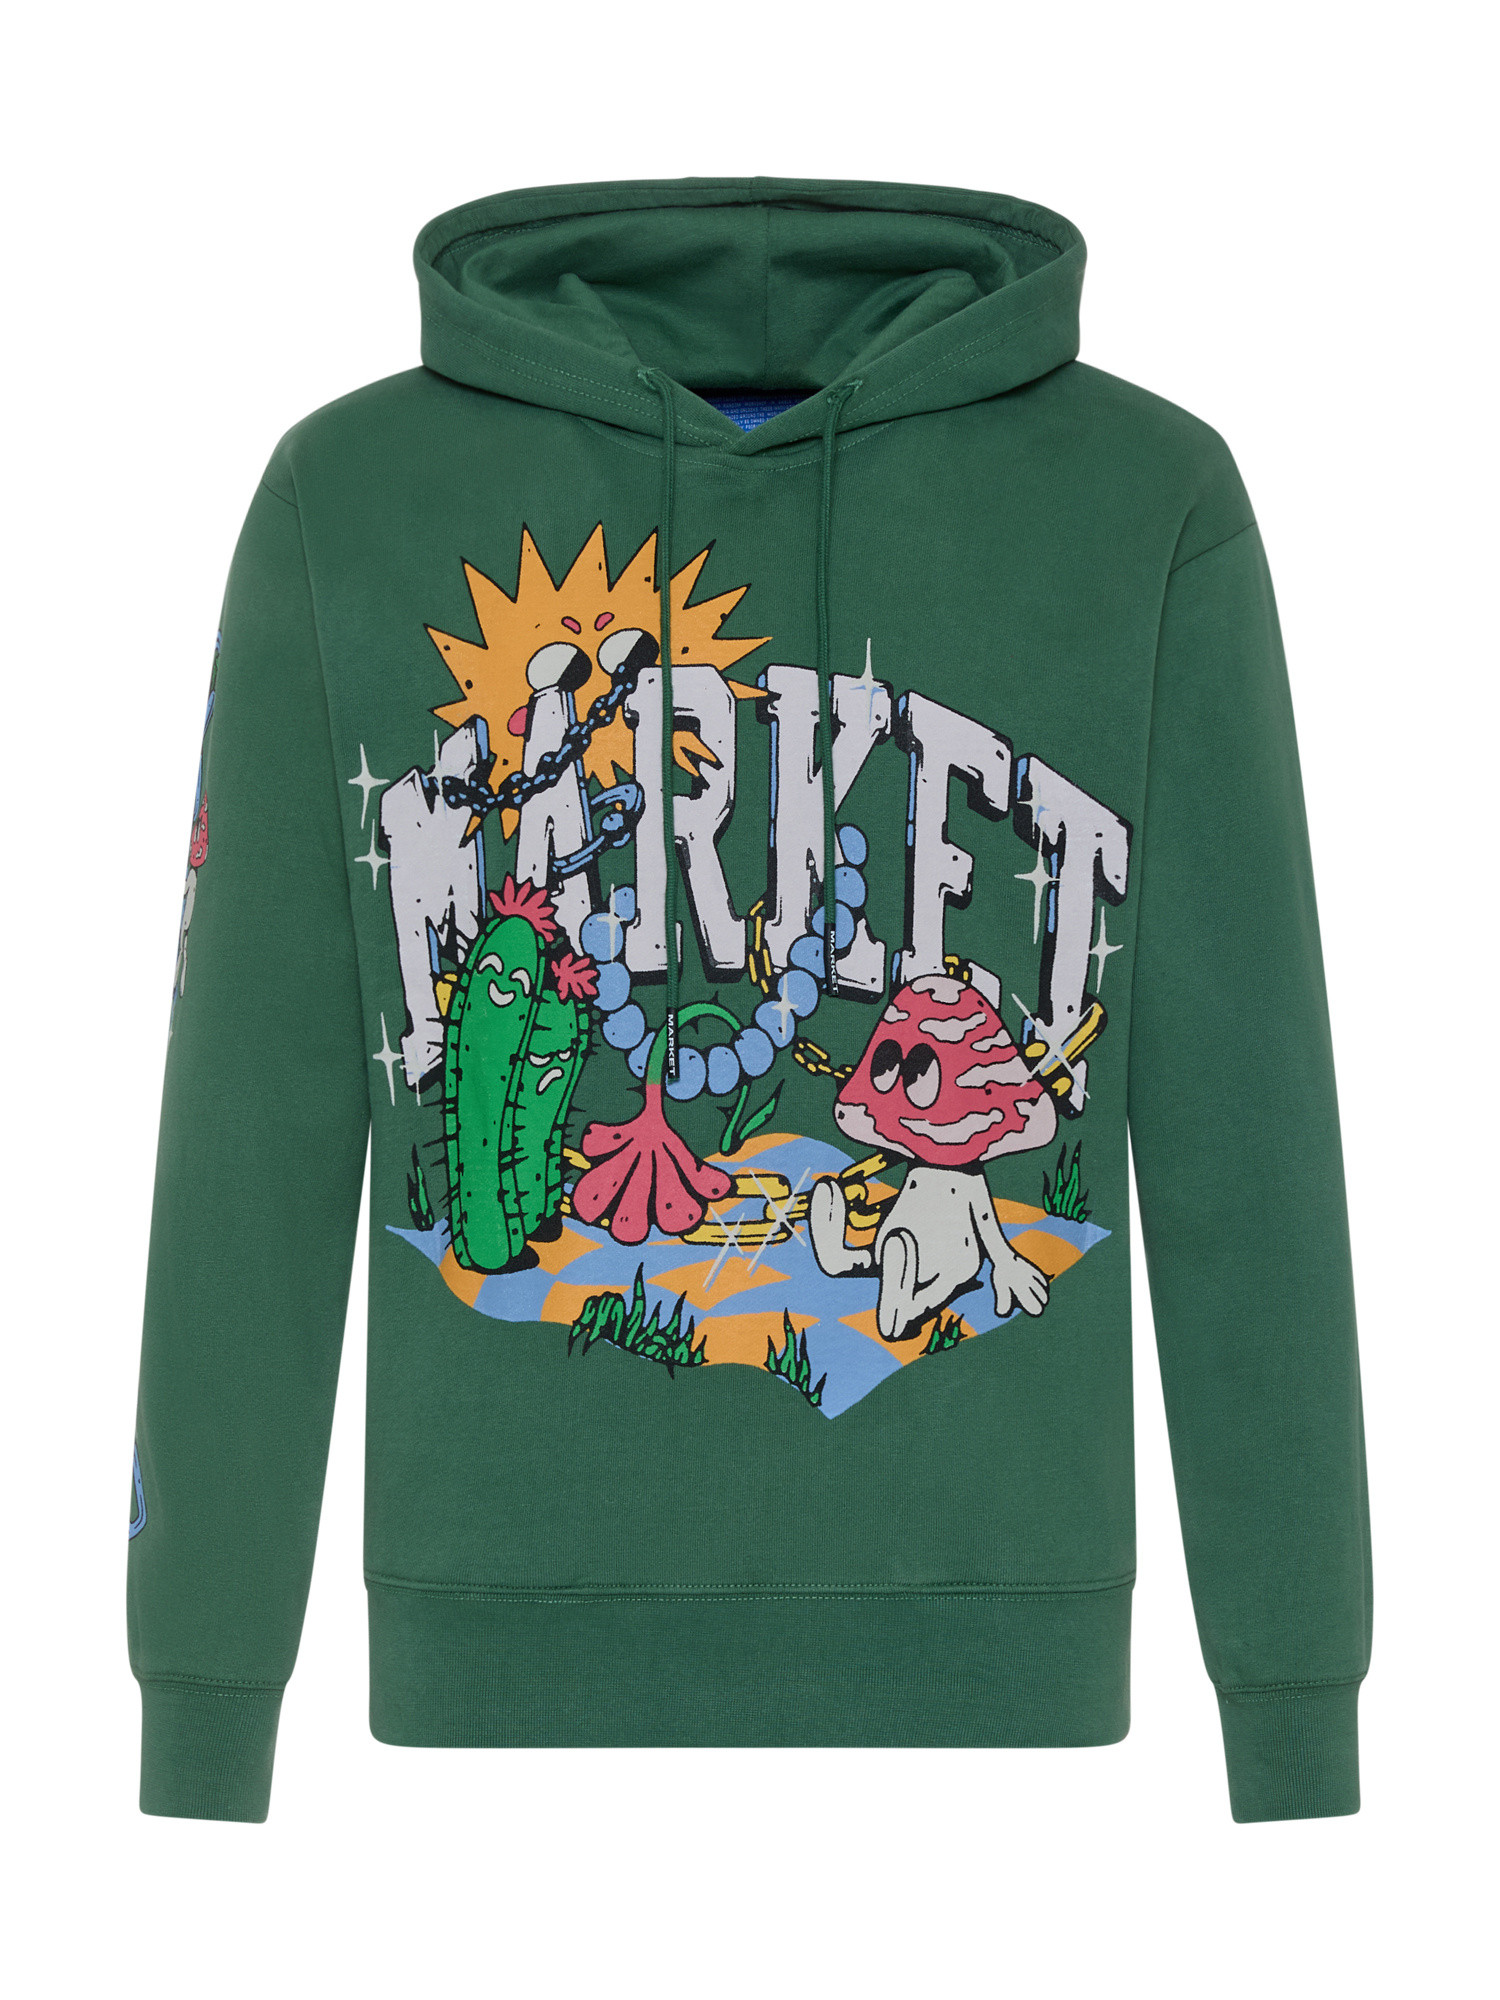 Market - Hooded sweatshirt with print, Green, large image number 0